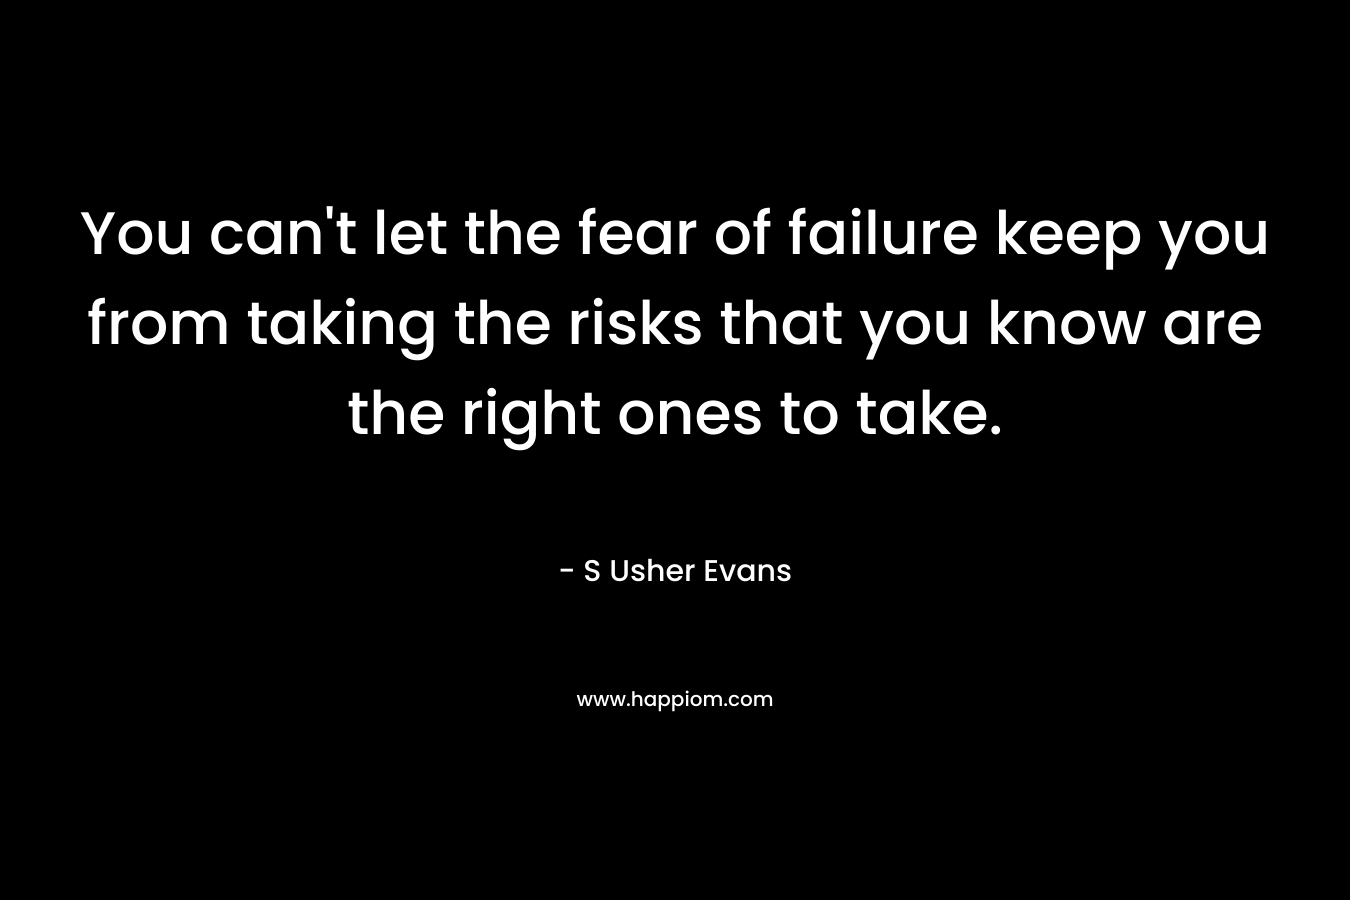 You can't let the fear of failure keep you from taking the risks that you know are the right ones to take.